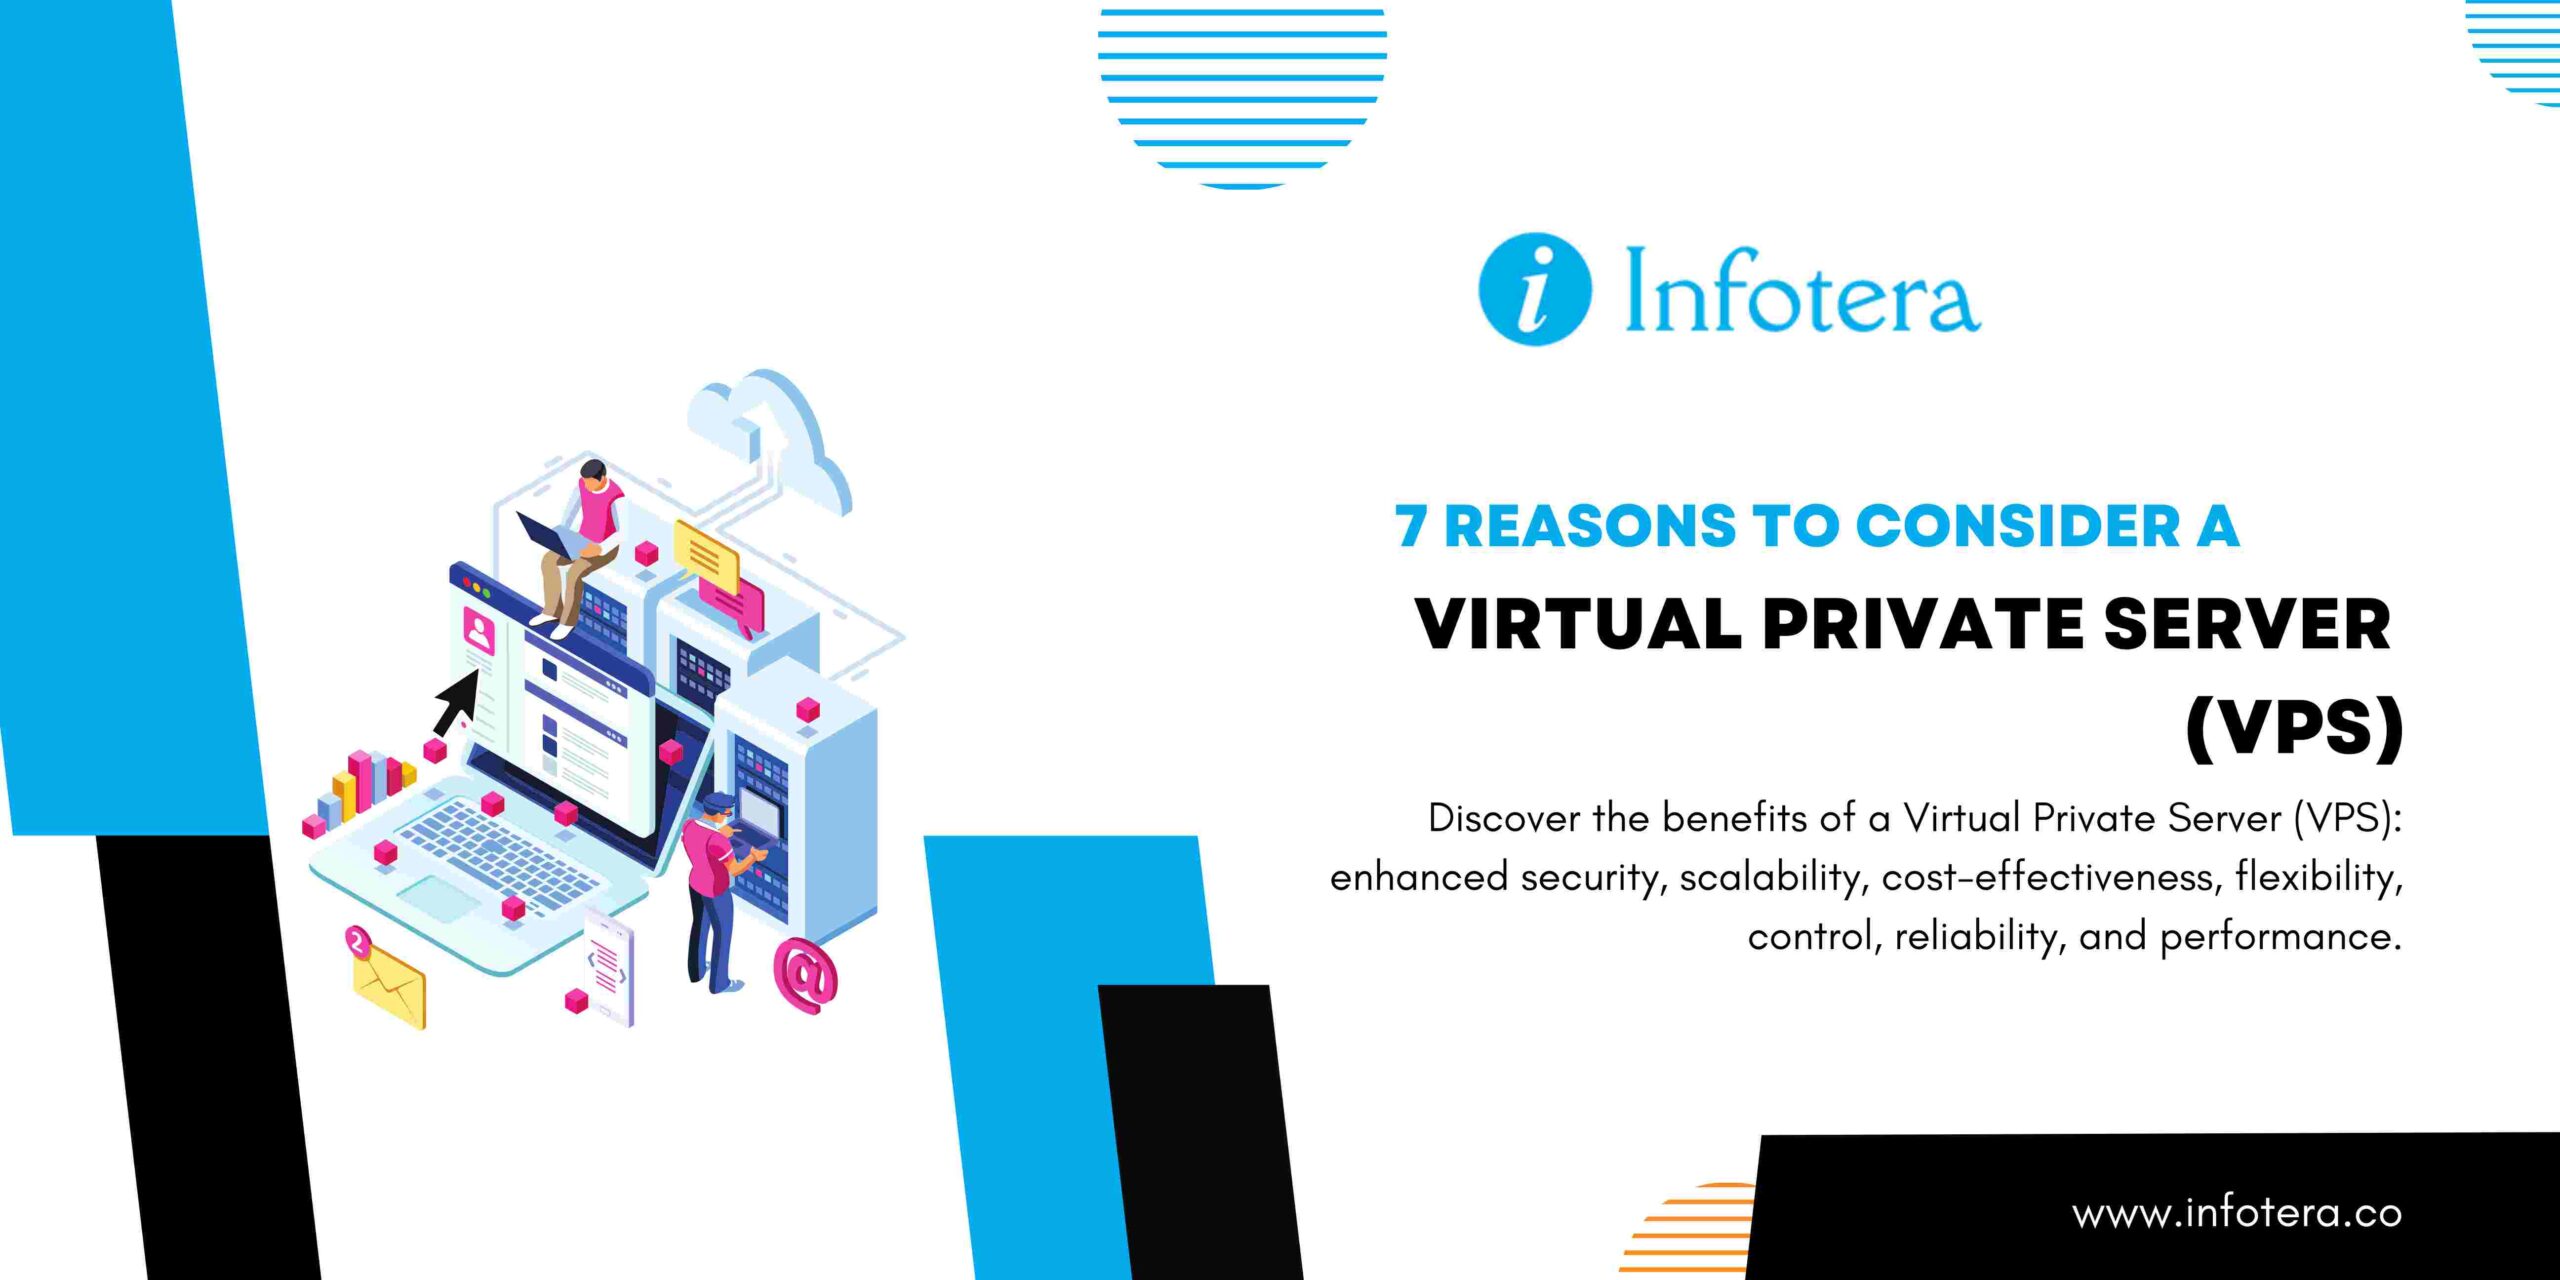 7 reasons to consider a virtual private server (VPS)